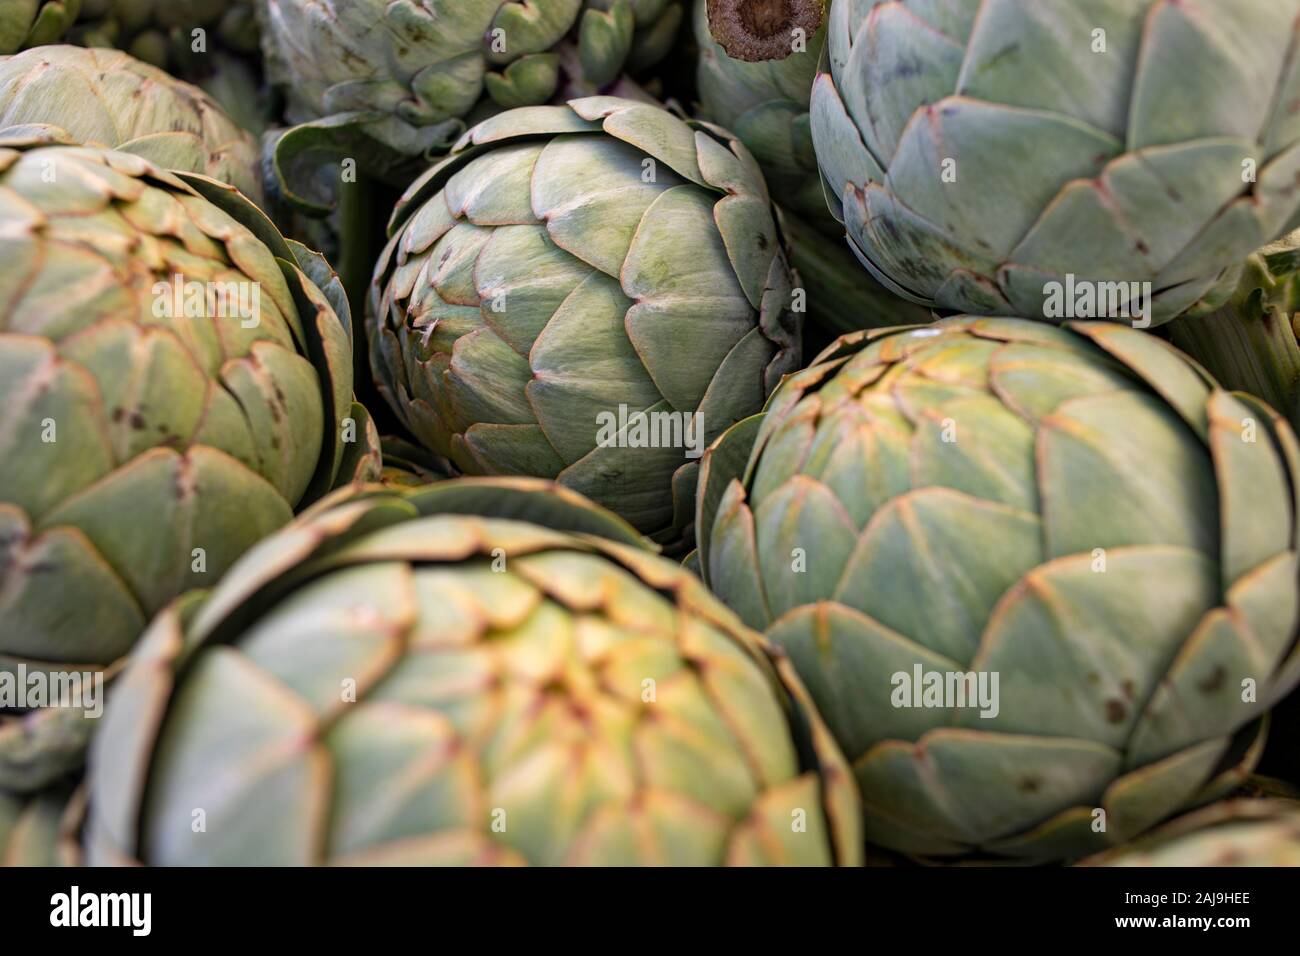 a pile of artichokes at a fruit and vegetable stand. Stock Photo